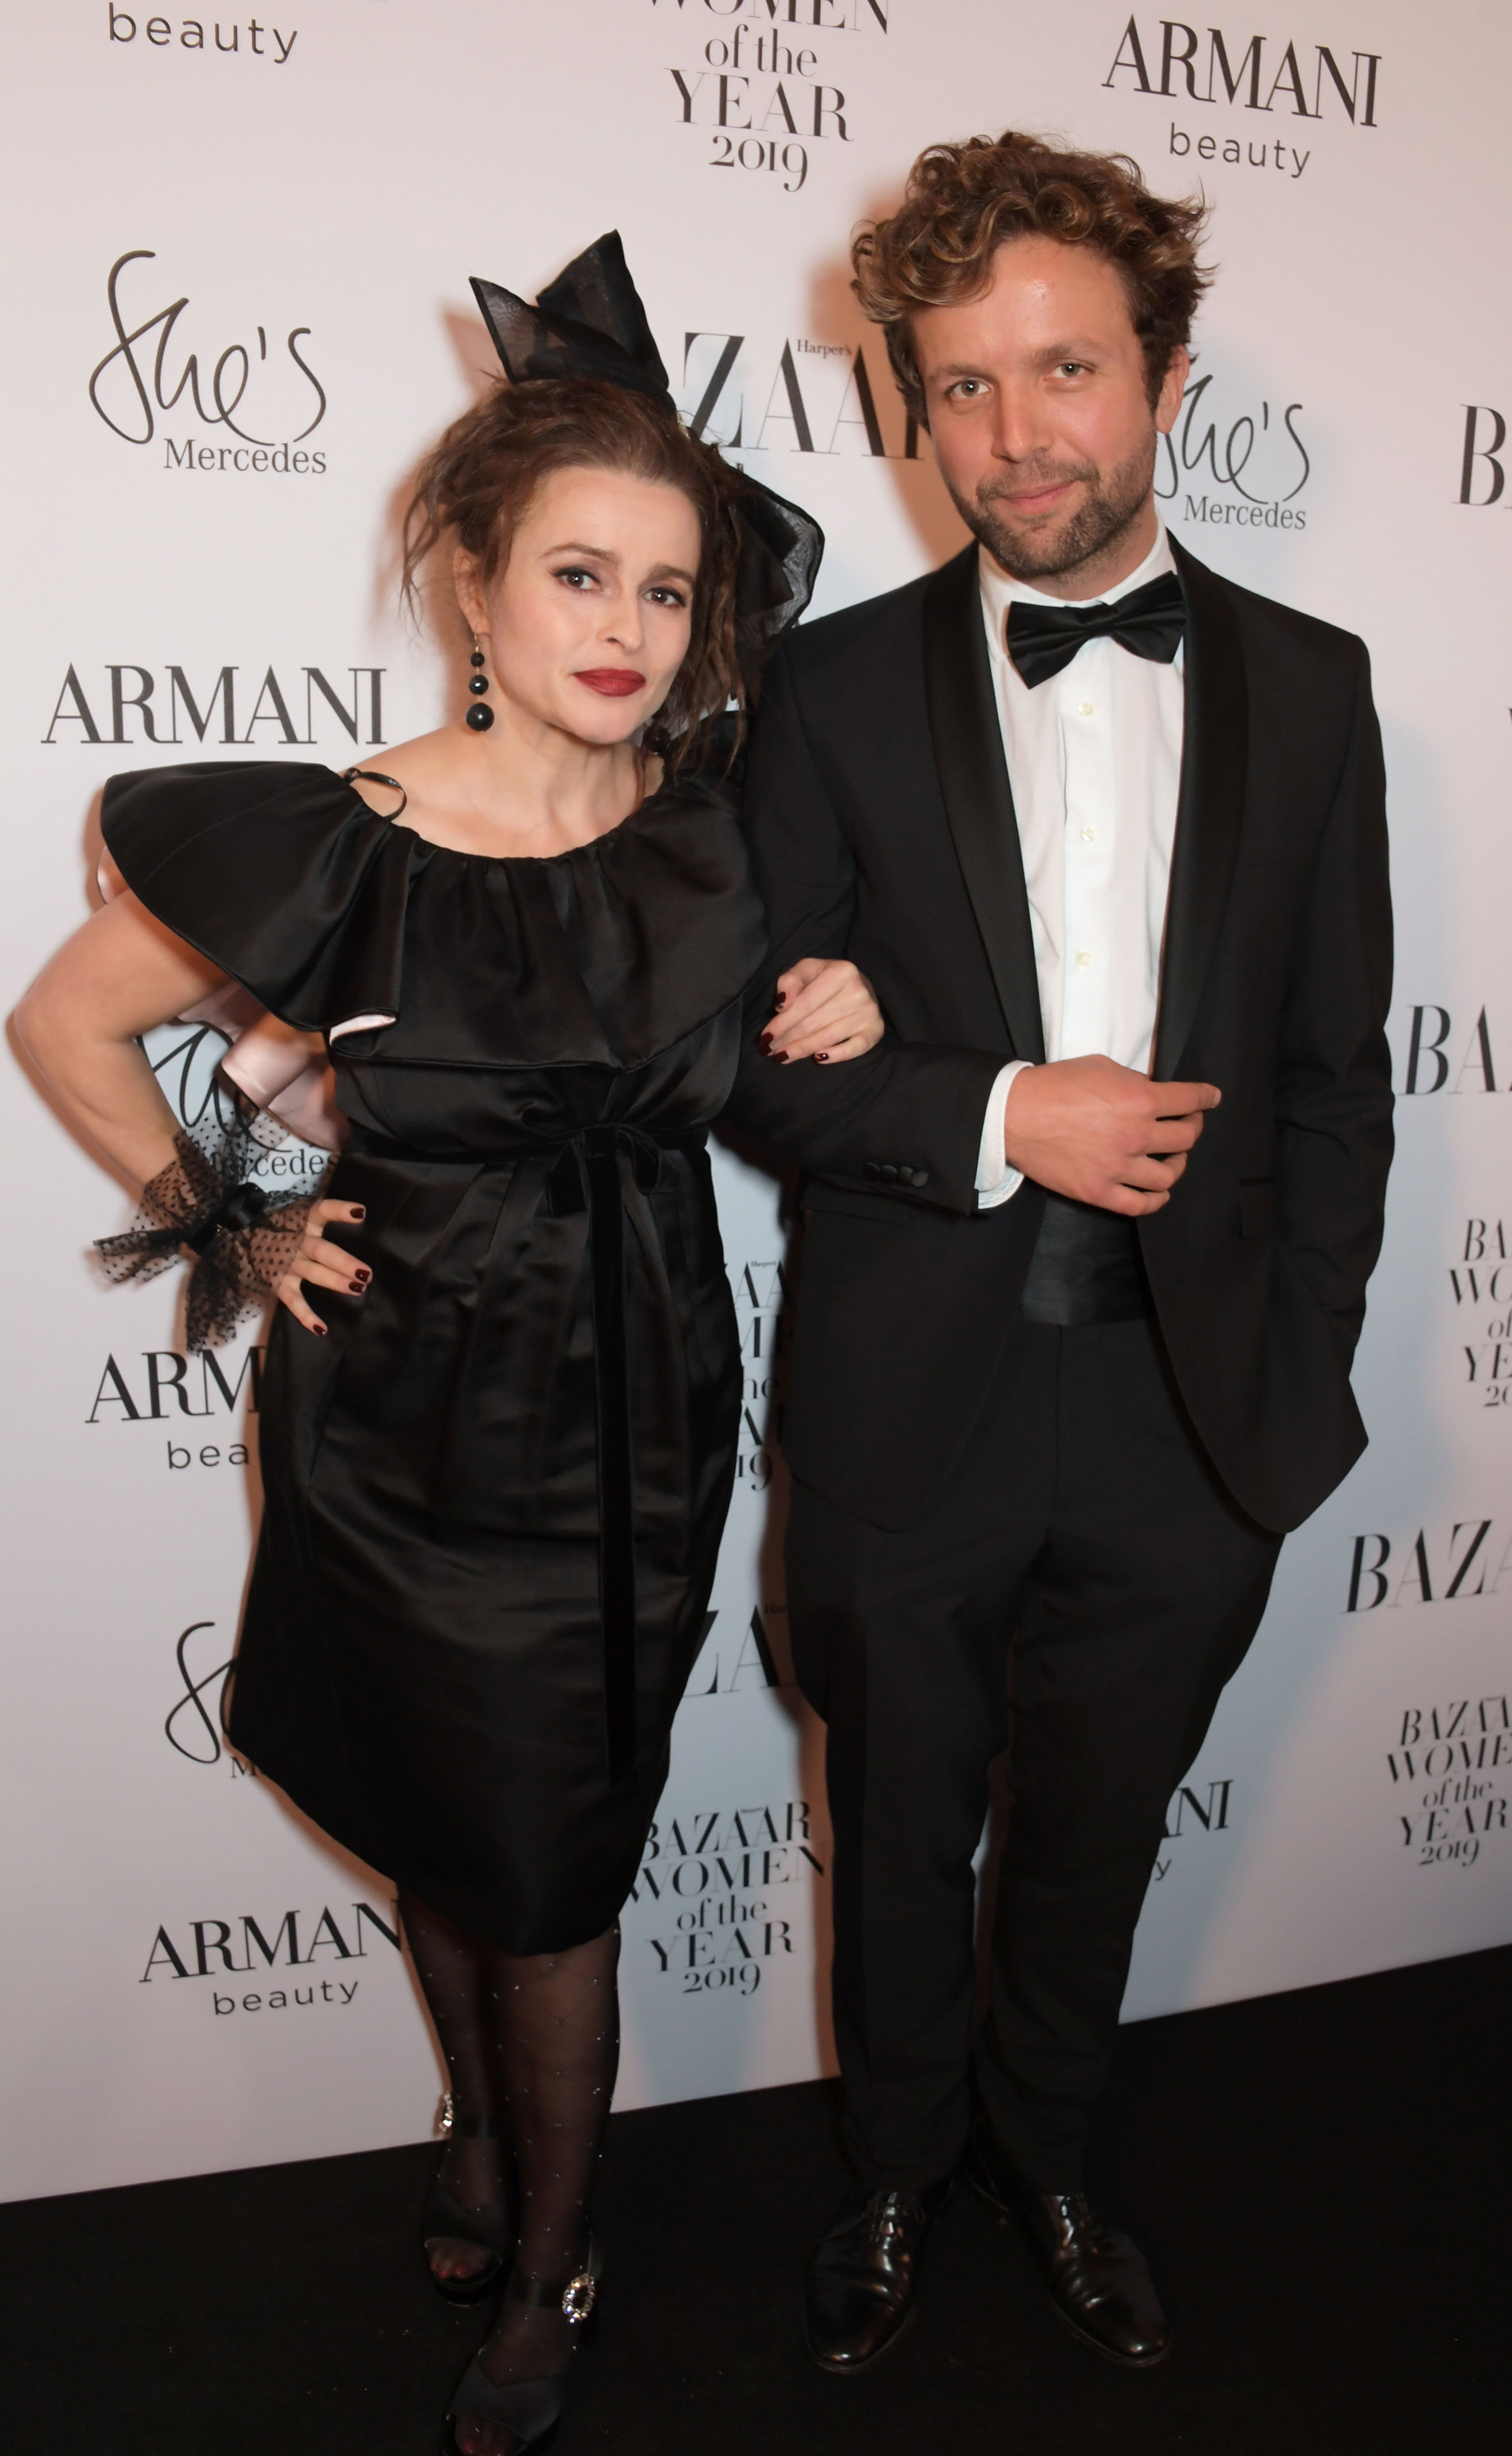 <p>British actress Helena Bonham Carter started seeing Rye Dag Holmboe -- a Norwegian writer and art historian who's 21 years her junior -- after they met at a wedding in 2018. In November 2022, she opened up about their two-decade age gap (at the time, she was 56 and Rye was 35) in an interview with <a href="https://www.thetimes.co.uk/article/22538022-69a8-11ed-a782-0f22726b9287?">The Sunday Times magazine</a>, saying her love was an "old soul in a young body" and noting that "people aren't necessarily their chronological age." In Helena's experience, "there are people I've been involved with who aren't necessarily their age, maturity-wise, whereas [Rye] is ageless," she explained. The "Harry Potter" franchise and "The Crown" star -- whose longest and most high-profile romances before Rye were with filmmakers Kenneth Branagh and Tim Burton, the father of her two kids -- also has a sense of humor about being older than Rye, quipping, "His eyesight is going, so we say I'm siphoning off his youth at night." She appreciates younger men who don't see a problem with dating older women. "Good on the men for appreciating different kinds of beauty and finding other things sexy," she said, adding, "Collagen is not the only form of sexiness; there's character, fun, mischief and humor. As long as you've got the laughter, the intimacy will be there."</p>